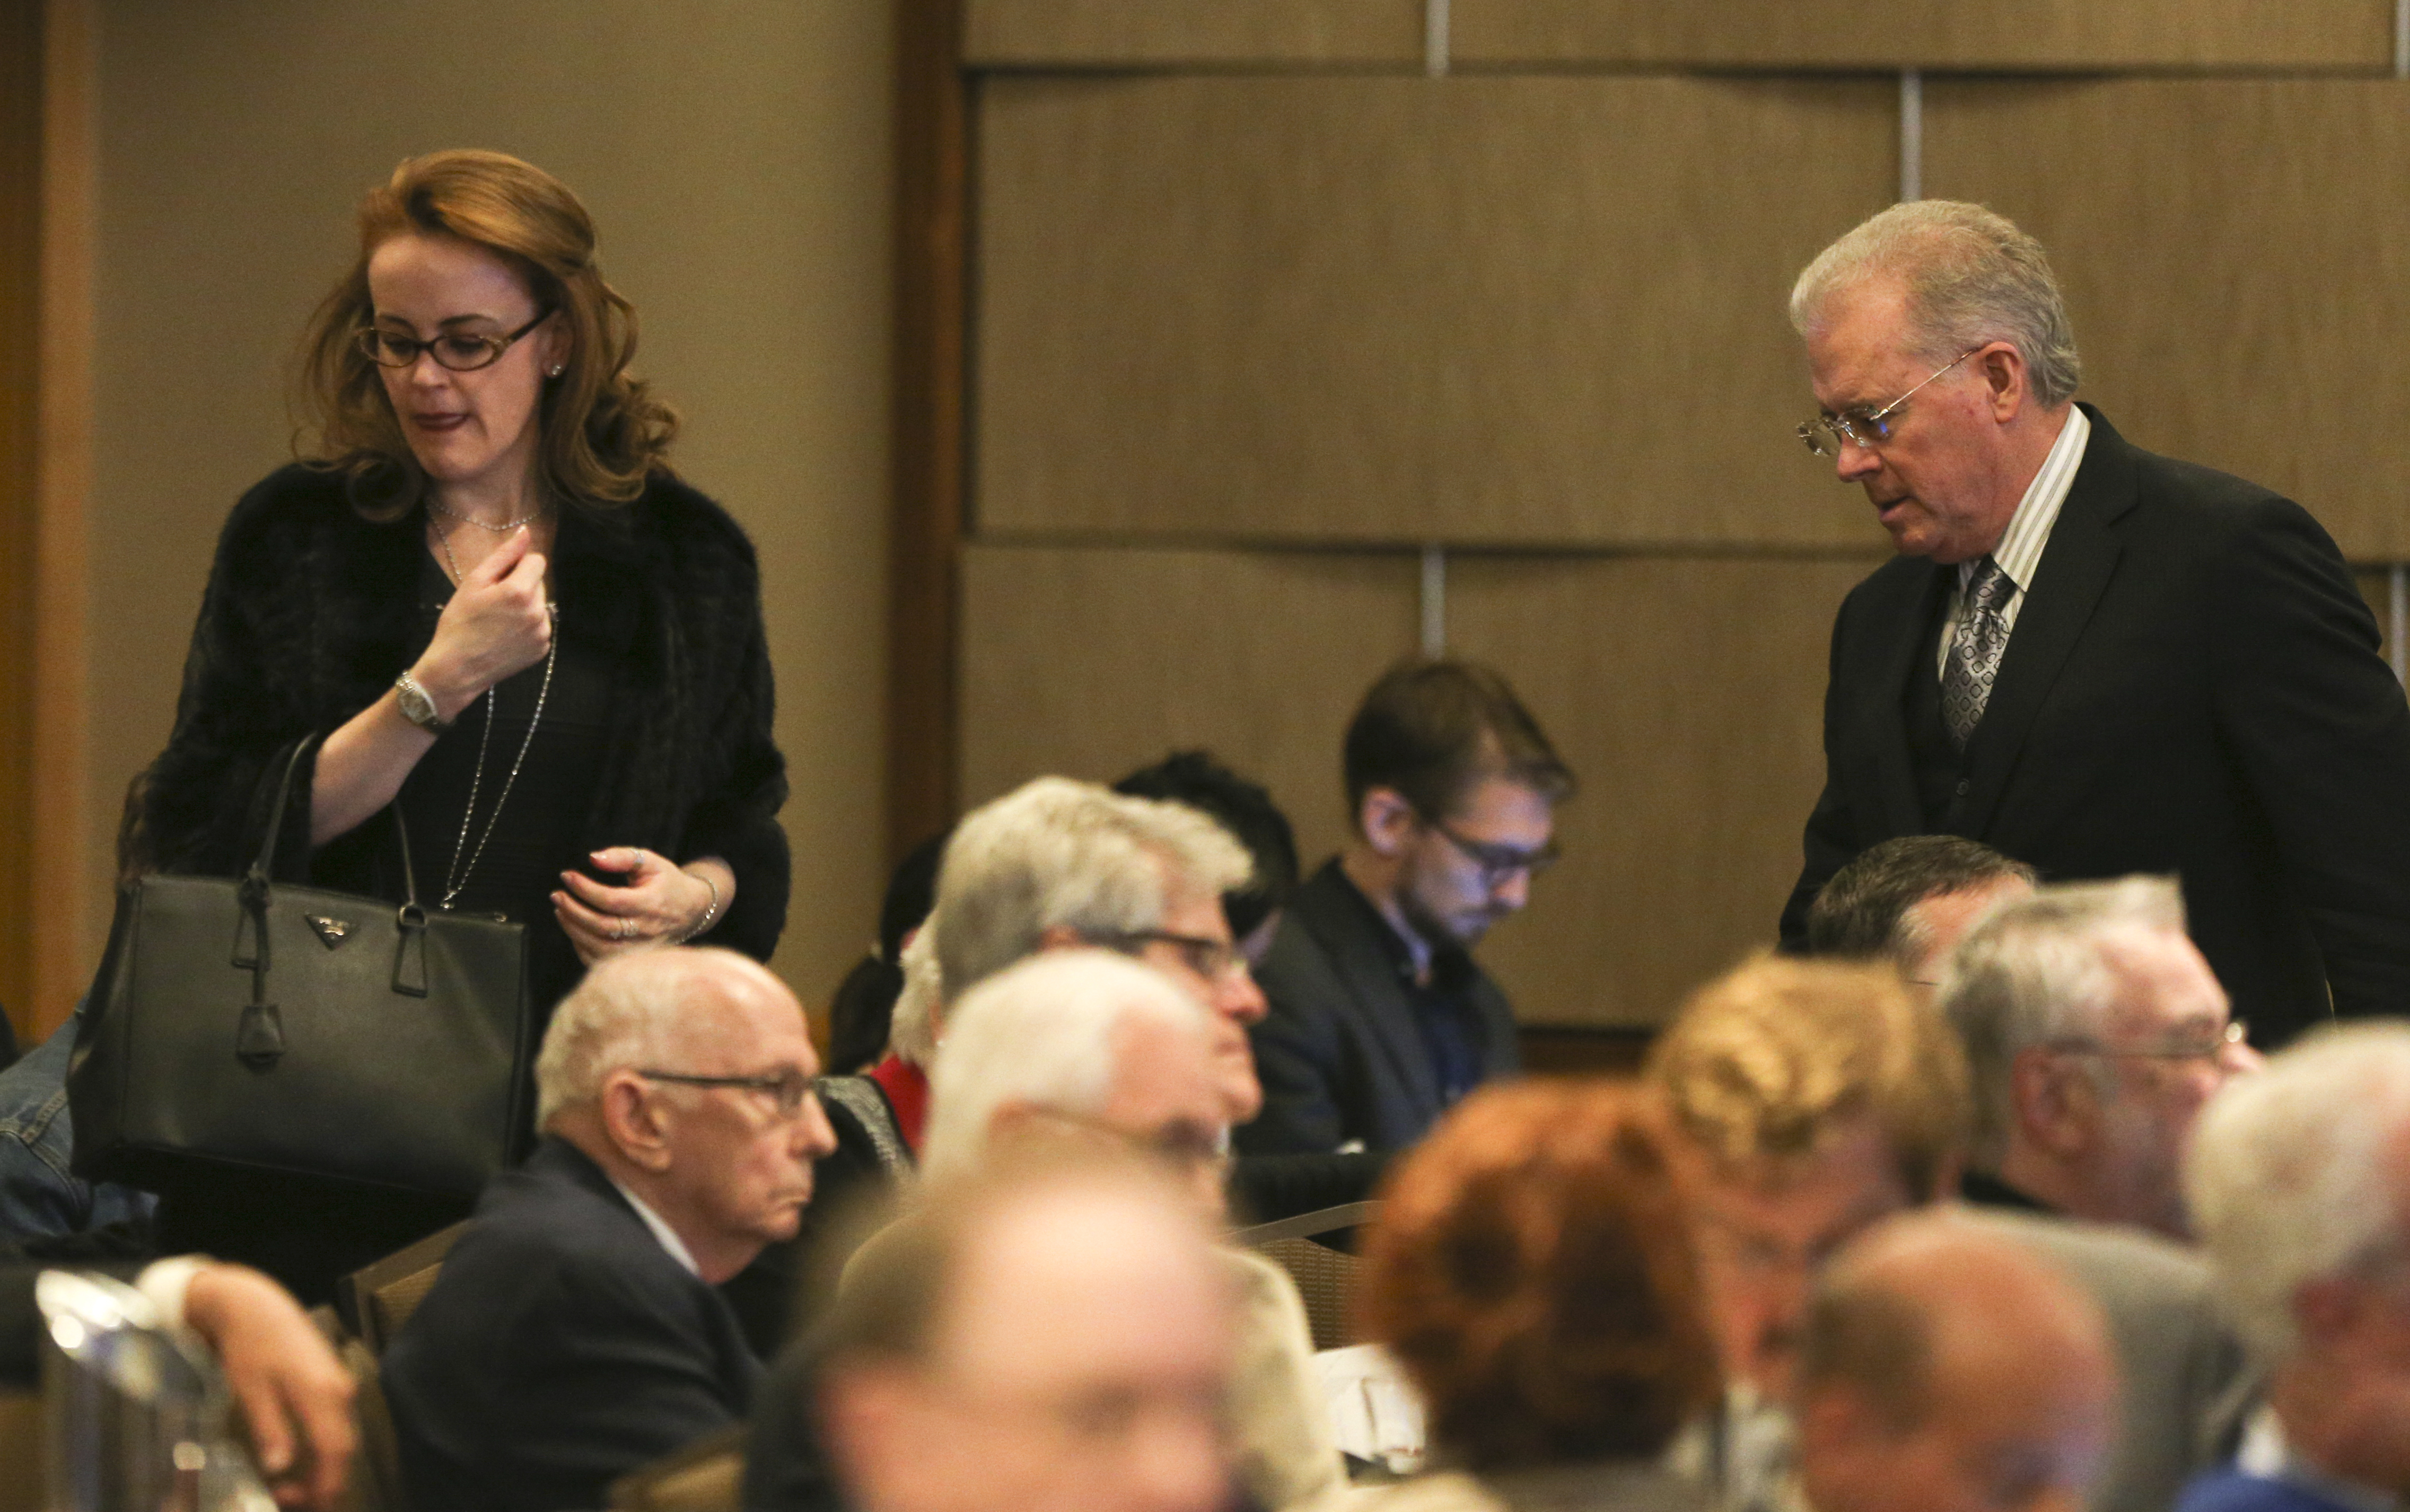 Billionaires Robert Mercer and his daughter Rebekah attend the 12th International Conference on Climate Change hosted by The Heartland Institute in 2017.